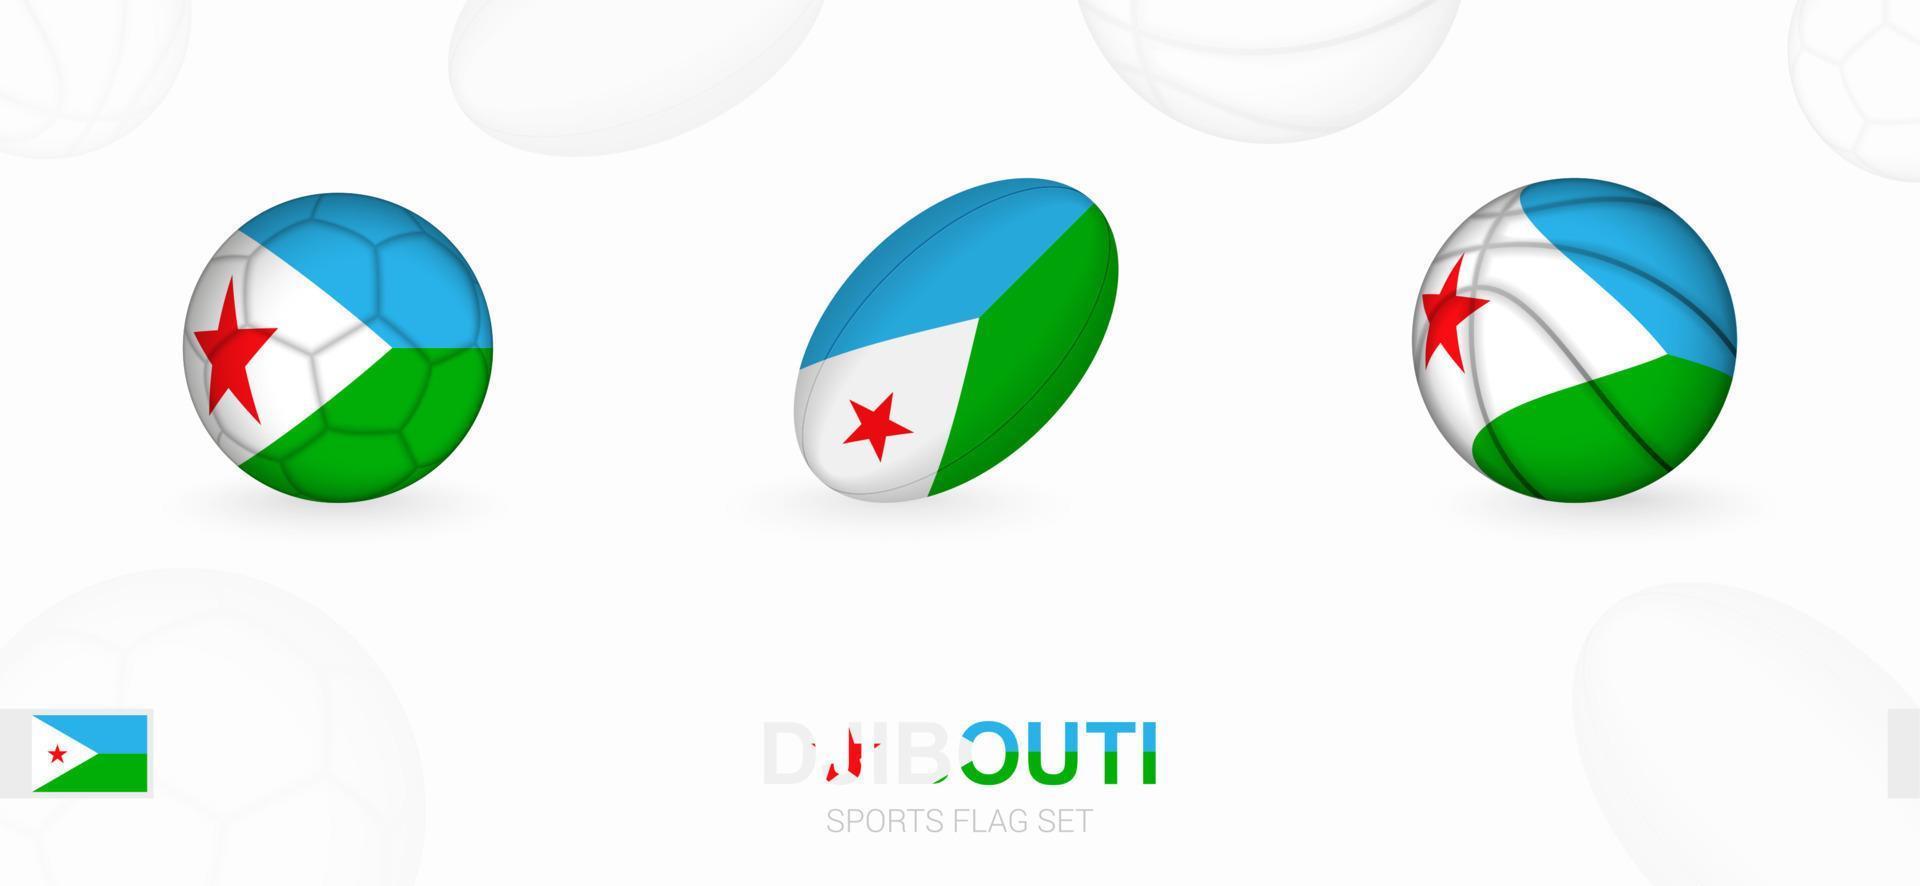 Sports icons for football, rugby and basketball with the flag of Djibouti. vector